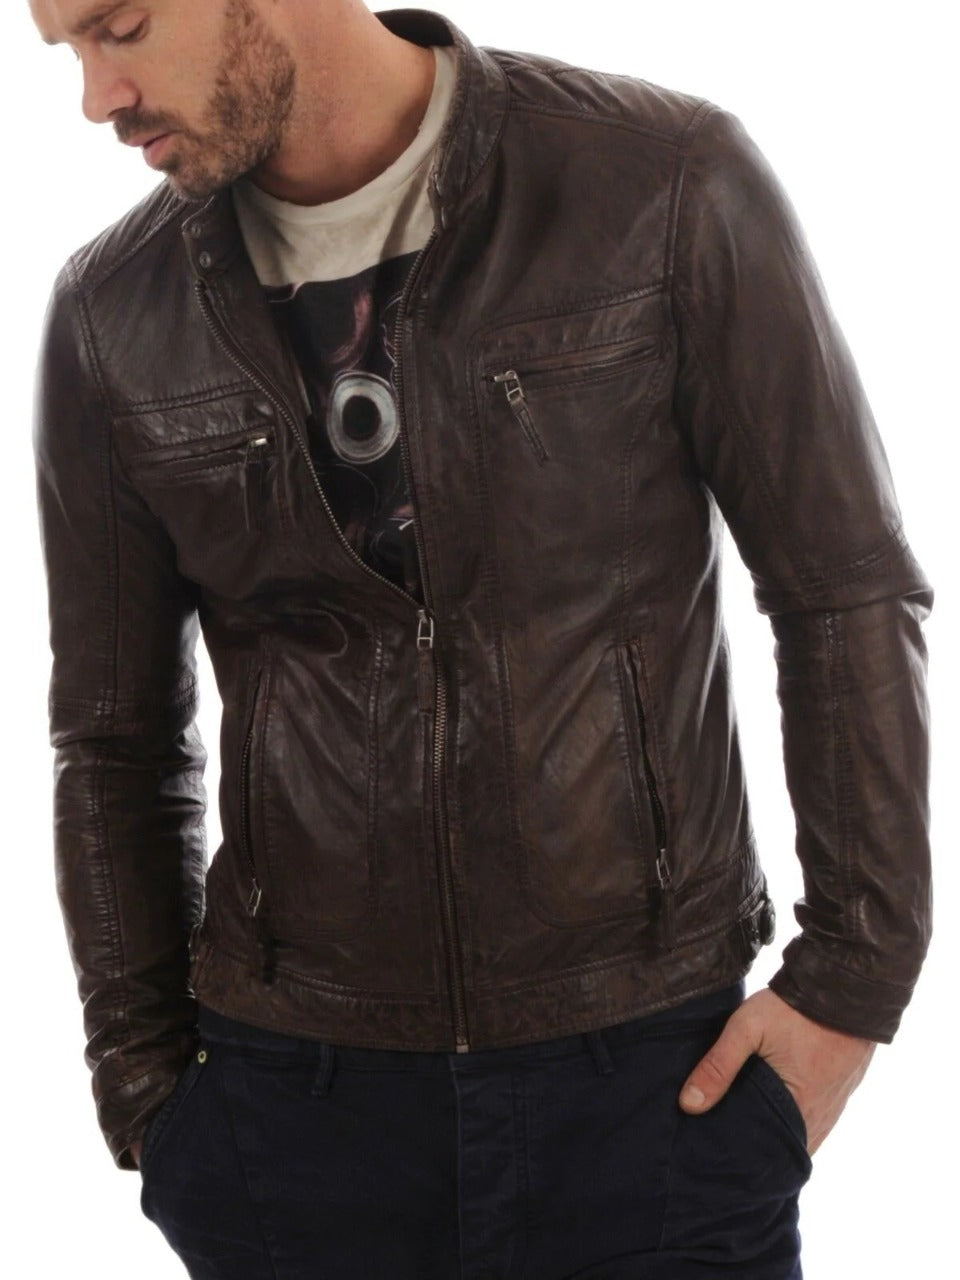 Noora Men's 100% leather FASHIONABLE BRANDED BROWN LEATHER JACKET BS-172